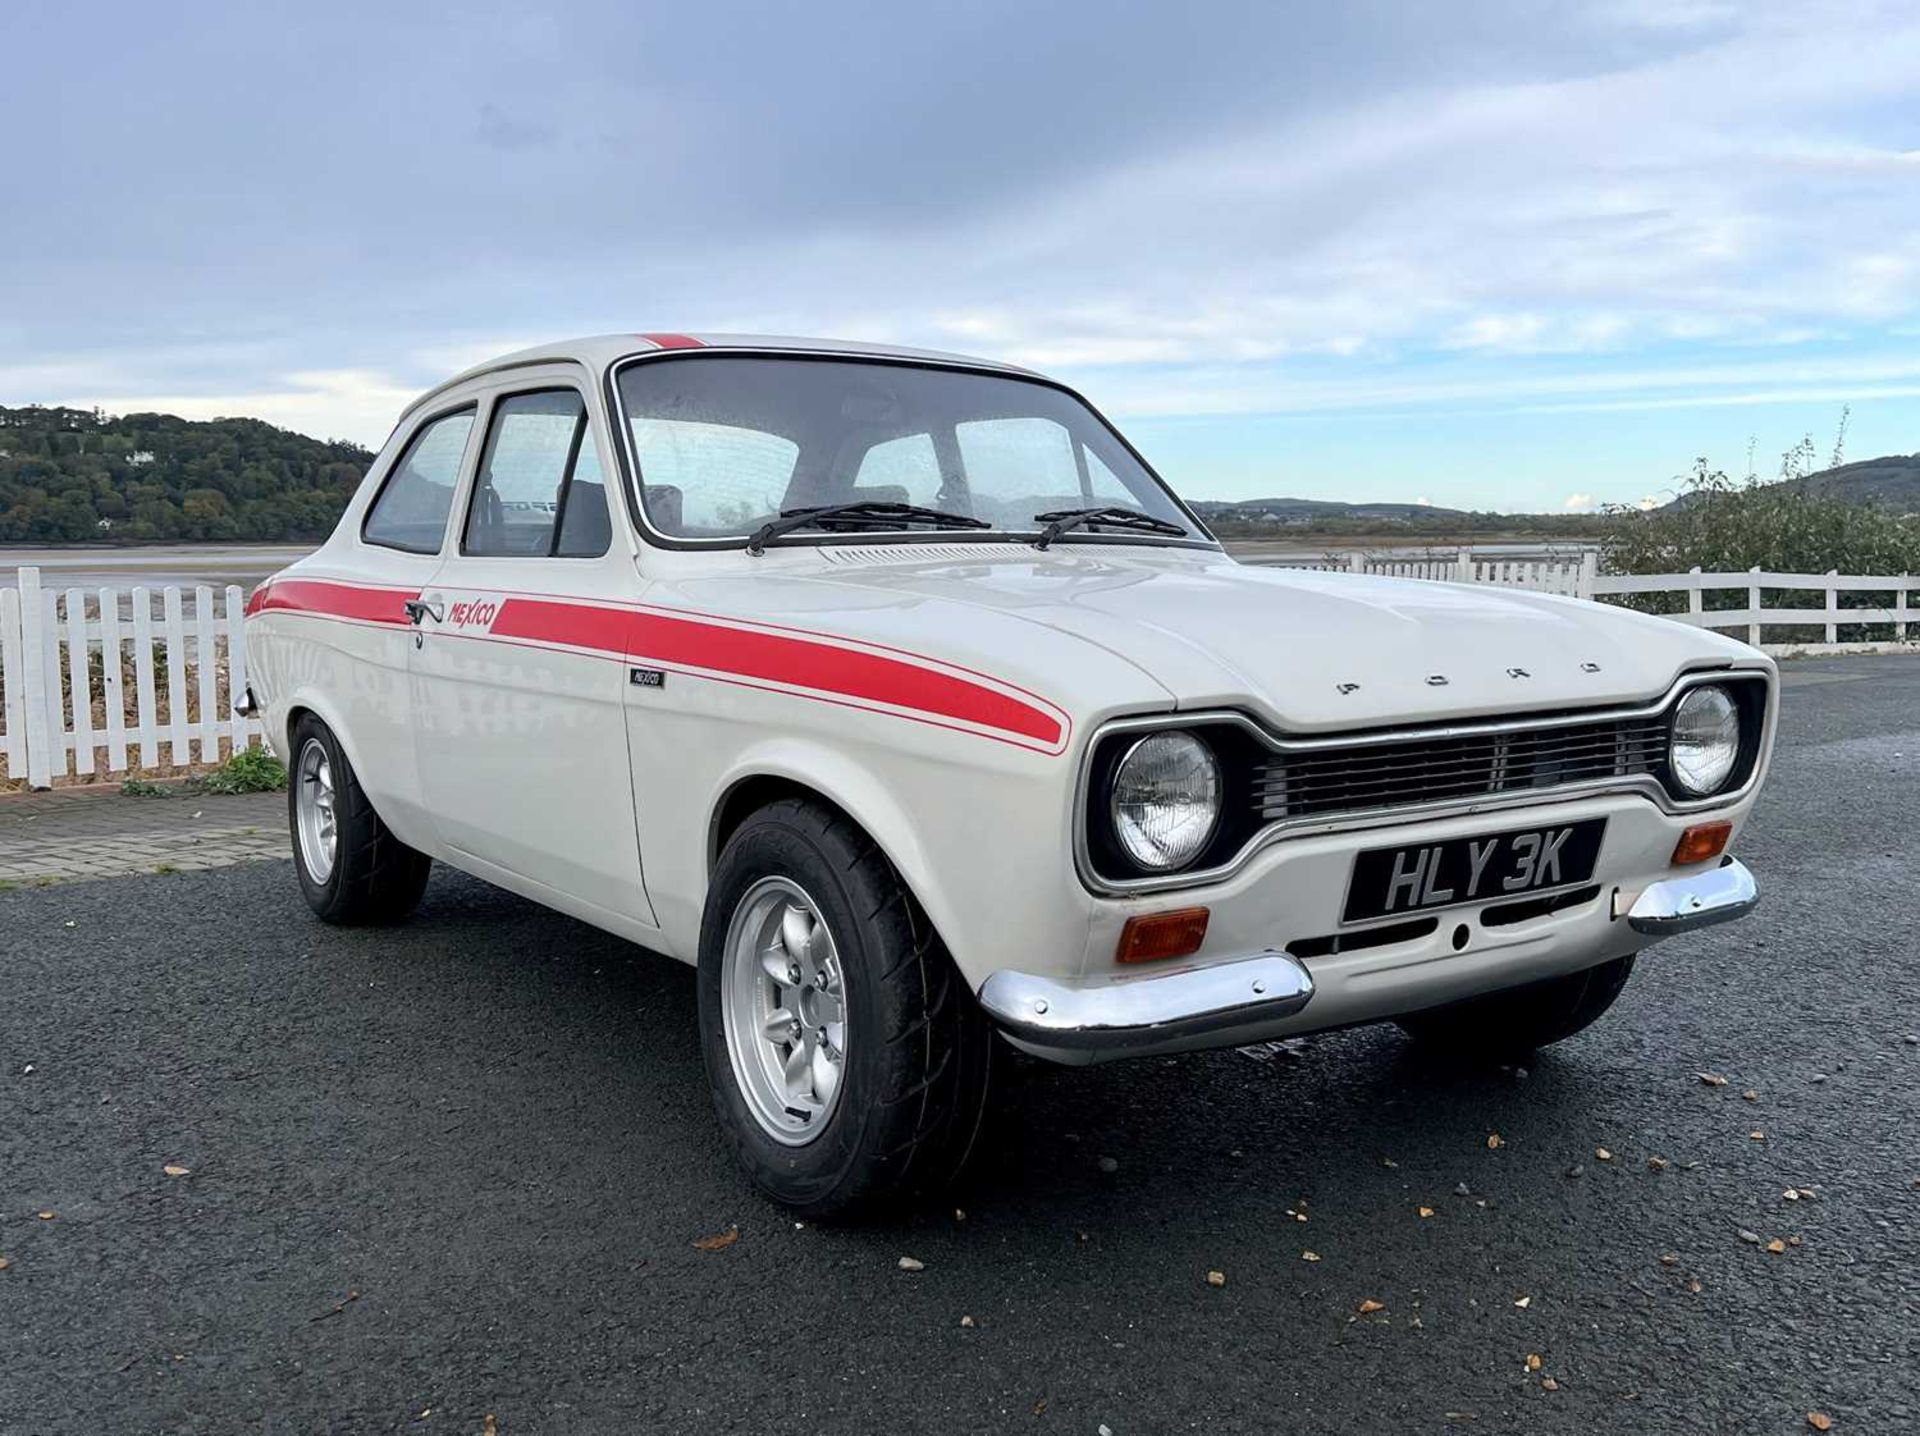 1971 Ford Escort Mexico with 2.1-litre Cosworth engine 2.1-Litre naturally aspirated Cosworth engine